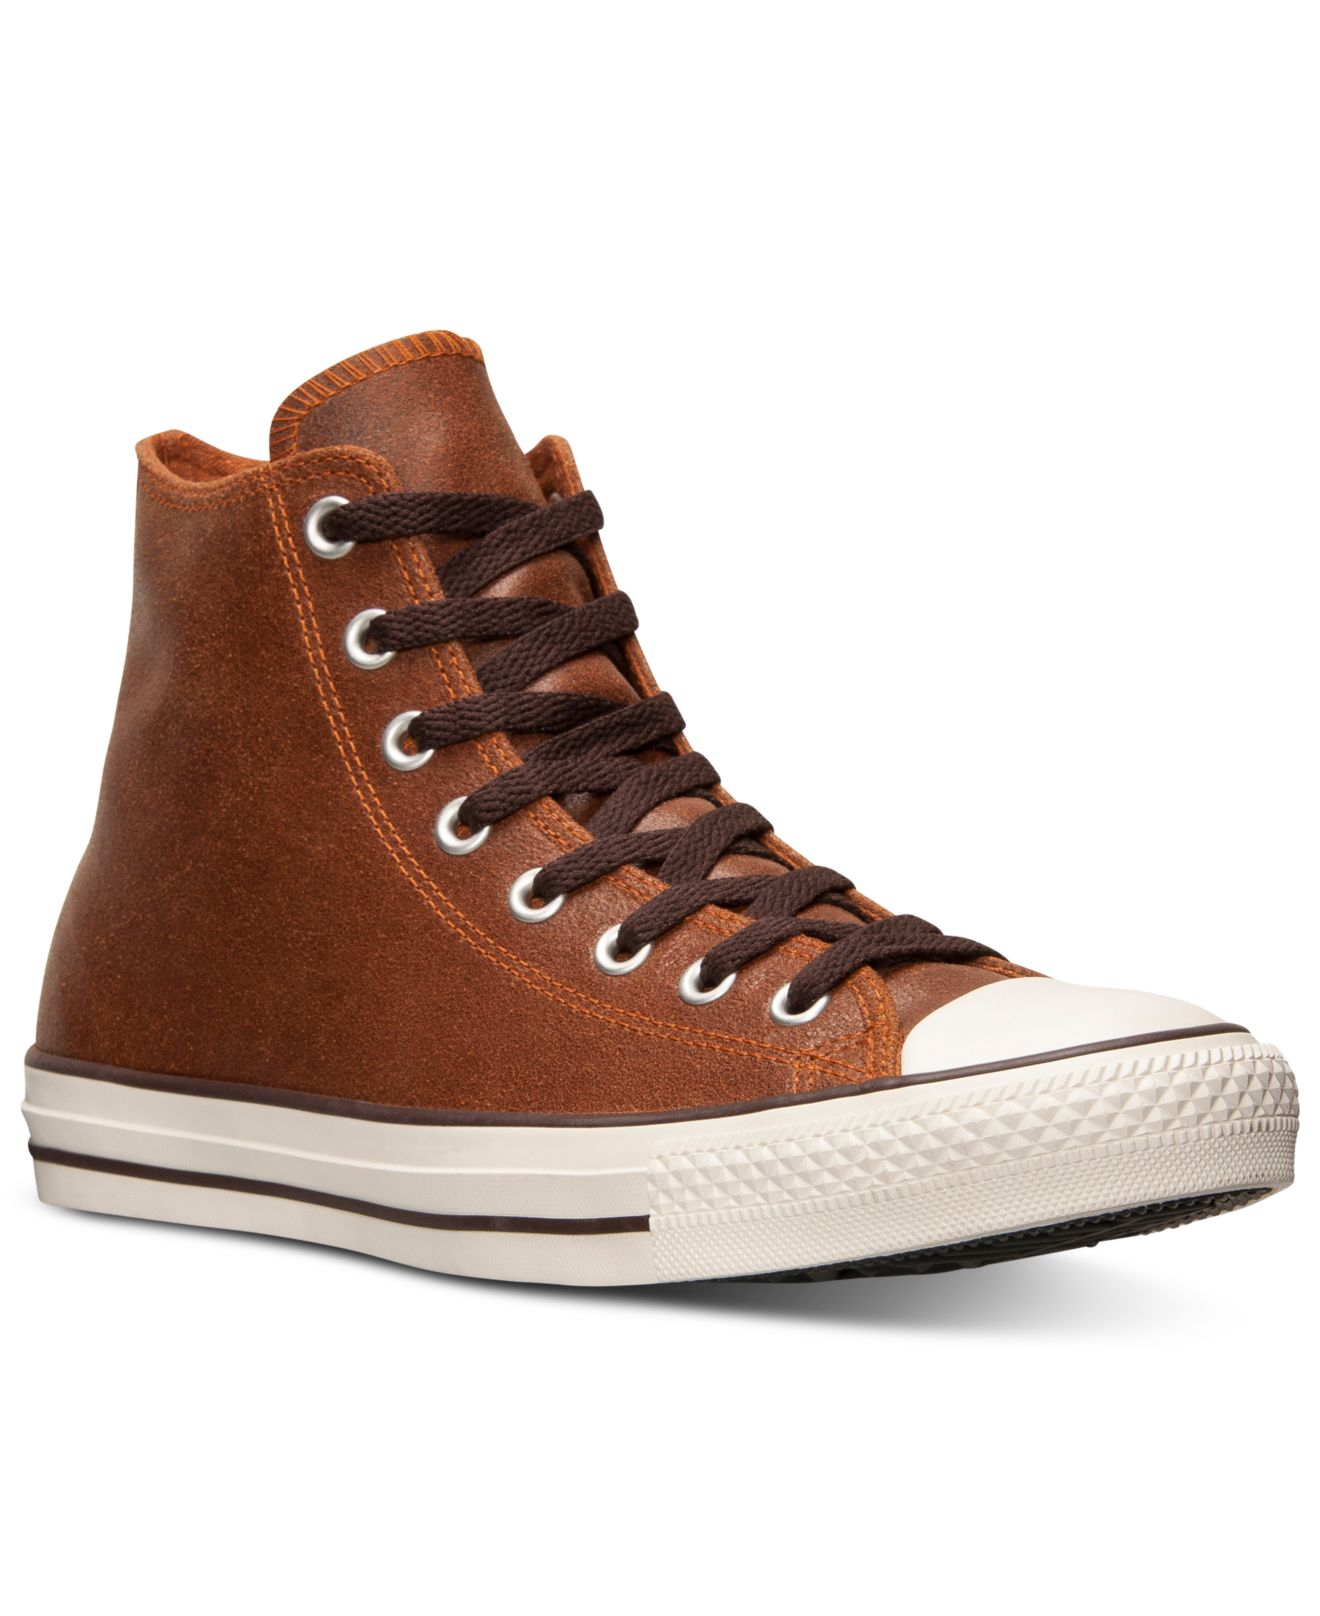 Converse Men'S All Star Vintage Leather Hi Casual Sneakers From Finish ...